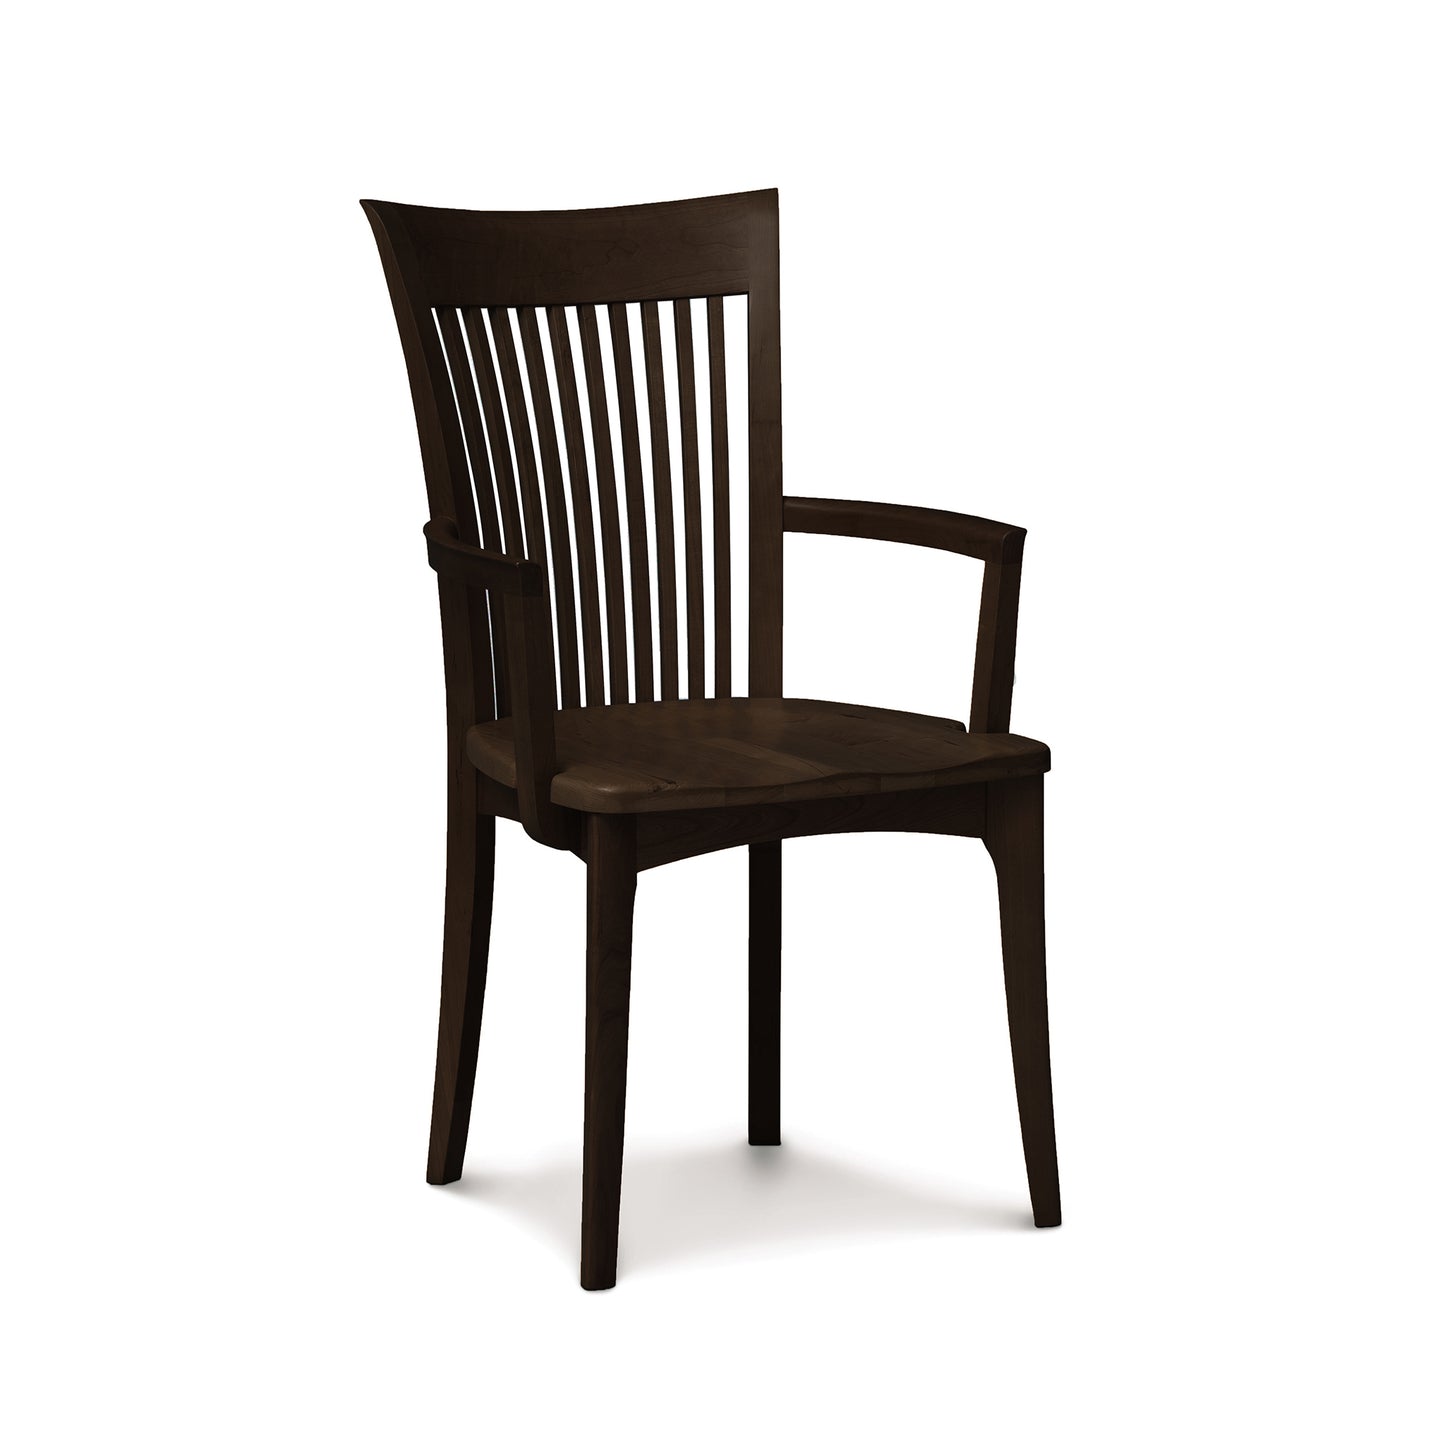 Sarah Shaker Cherry Chair with Wooden Seat from Copeland Furniture, with vertical back slats and armrests, isolated against a white background.